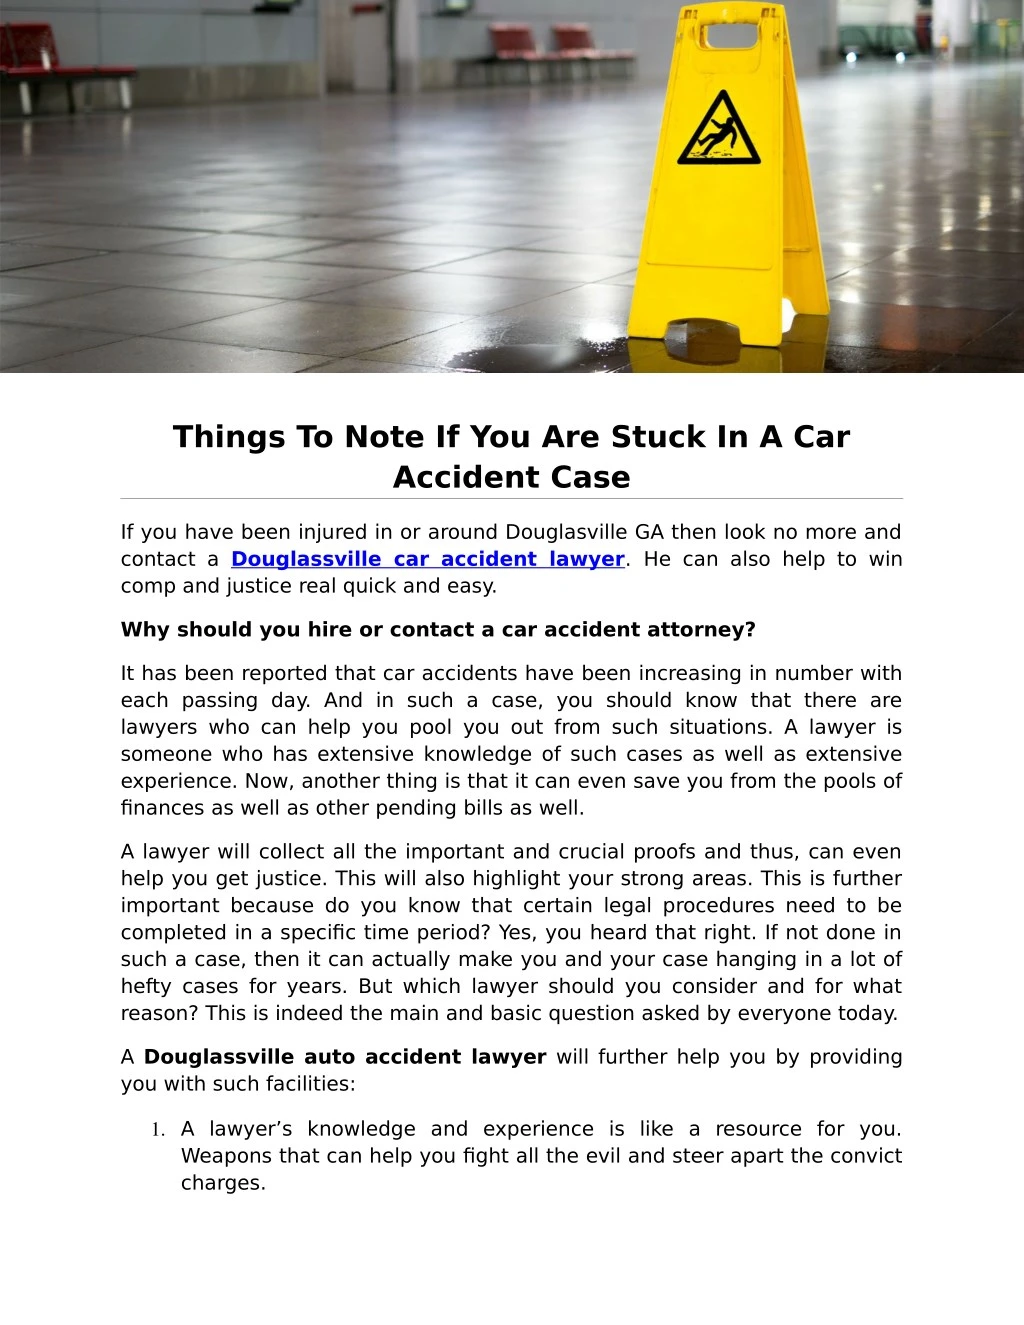 things to note if you are stuck in a car accident